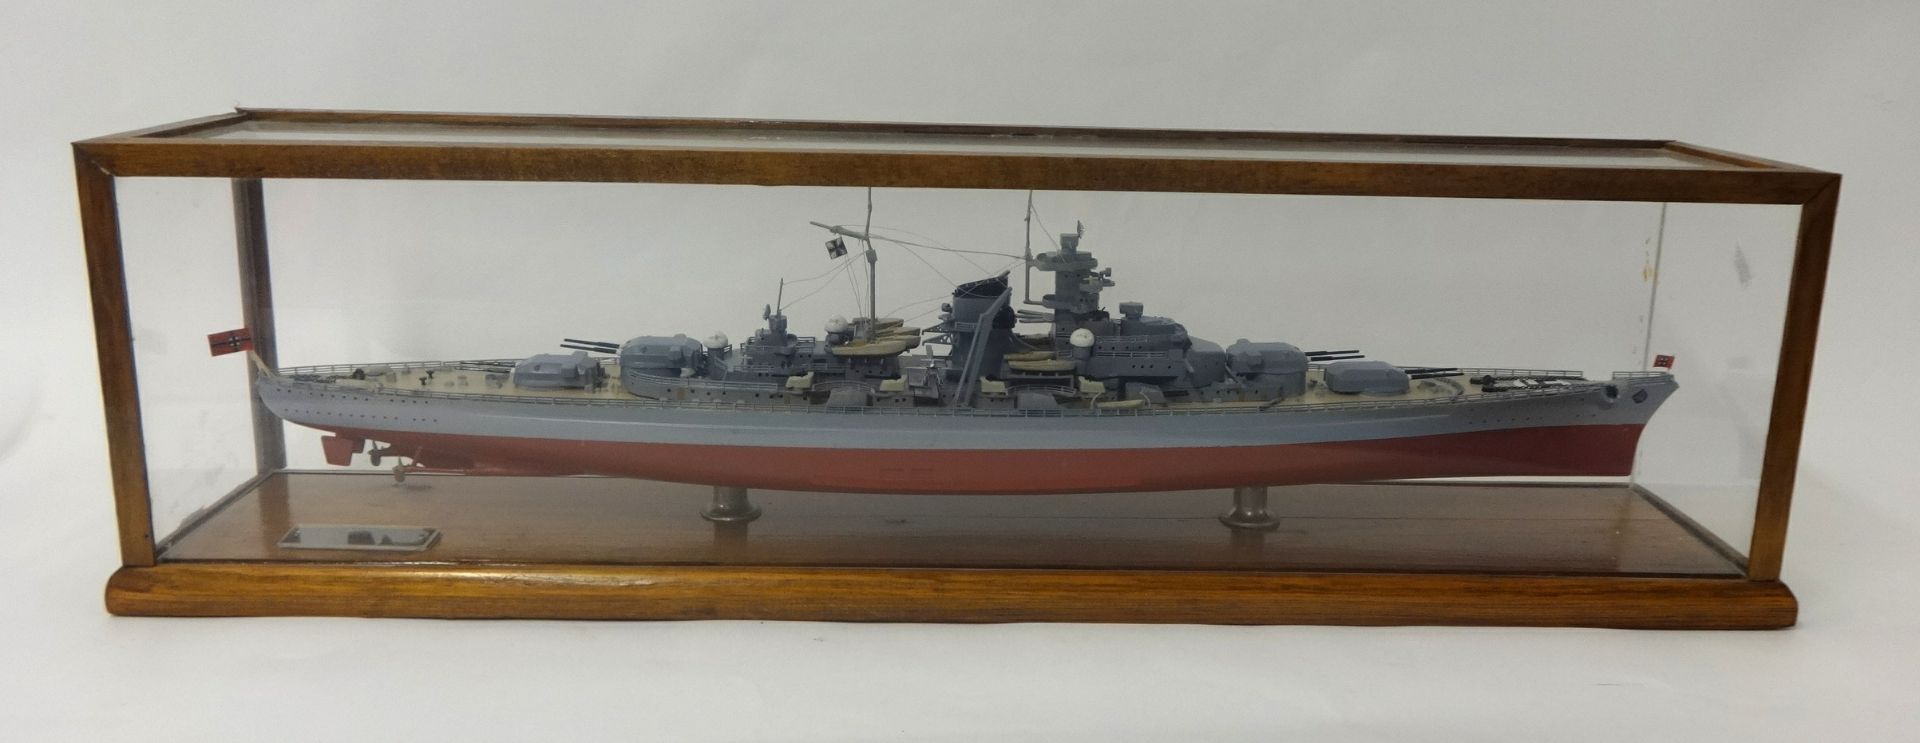 COLLECTION OF SCALE MODELS OF MILITARY INTEREST